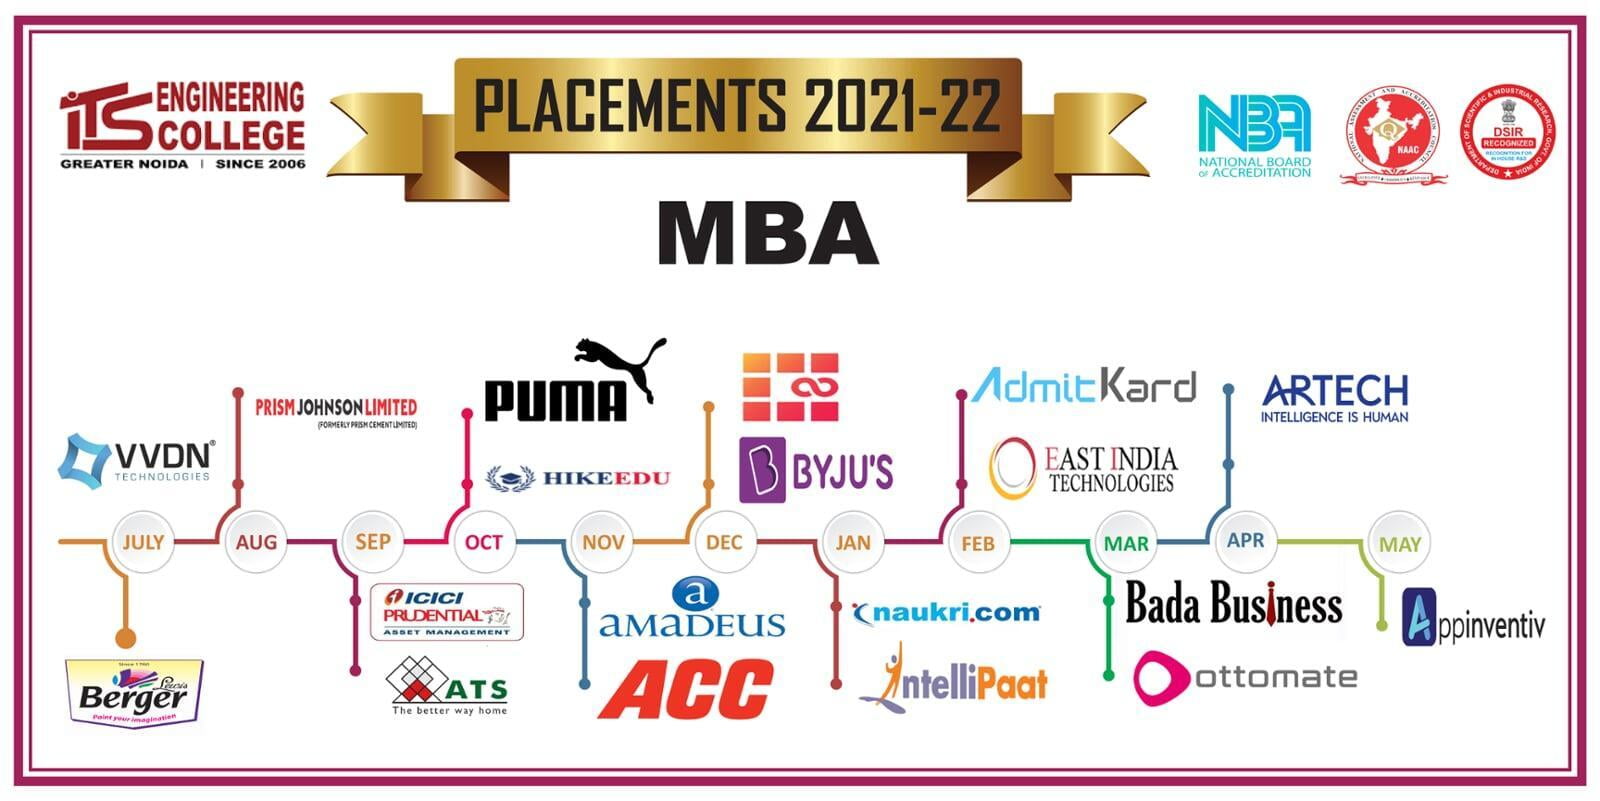 MBA Recruiters 2022 ITS Engineering College